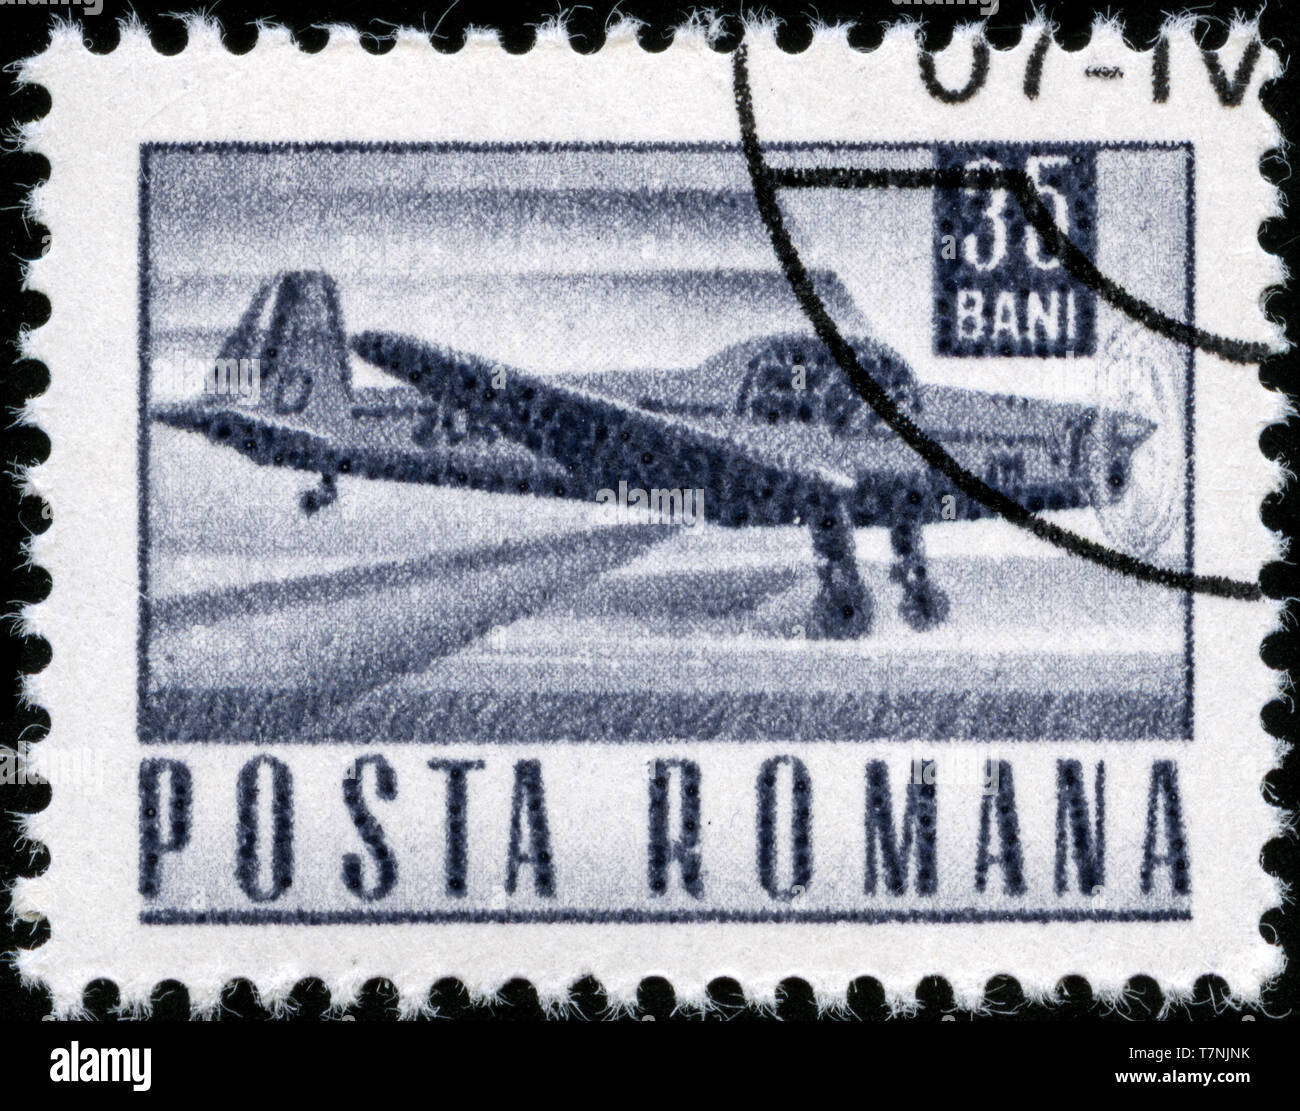 Postage stamp from Romania in the Postal and Transport series issued in 1968 Stock Photo